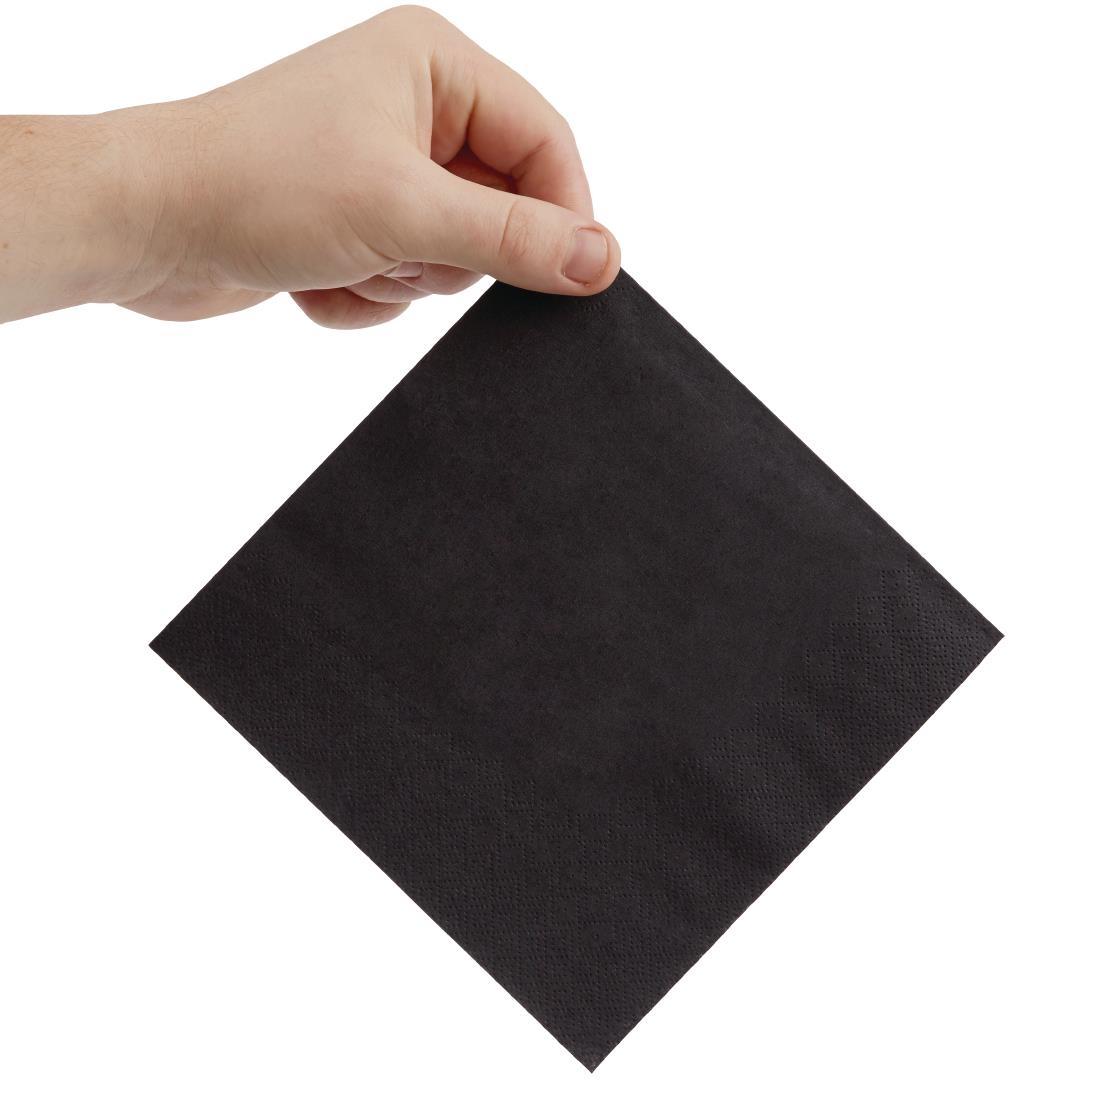 Fiesta Recyclable Lunch Napkin Black 33x33cm 2ply 1/4 Fold (Pack of 2000) - FE225  - 3